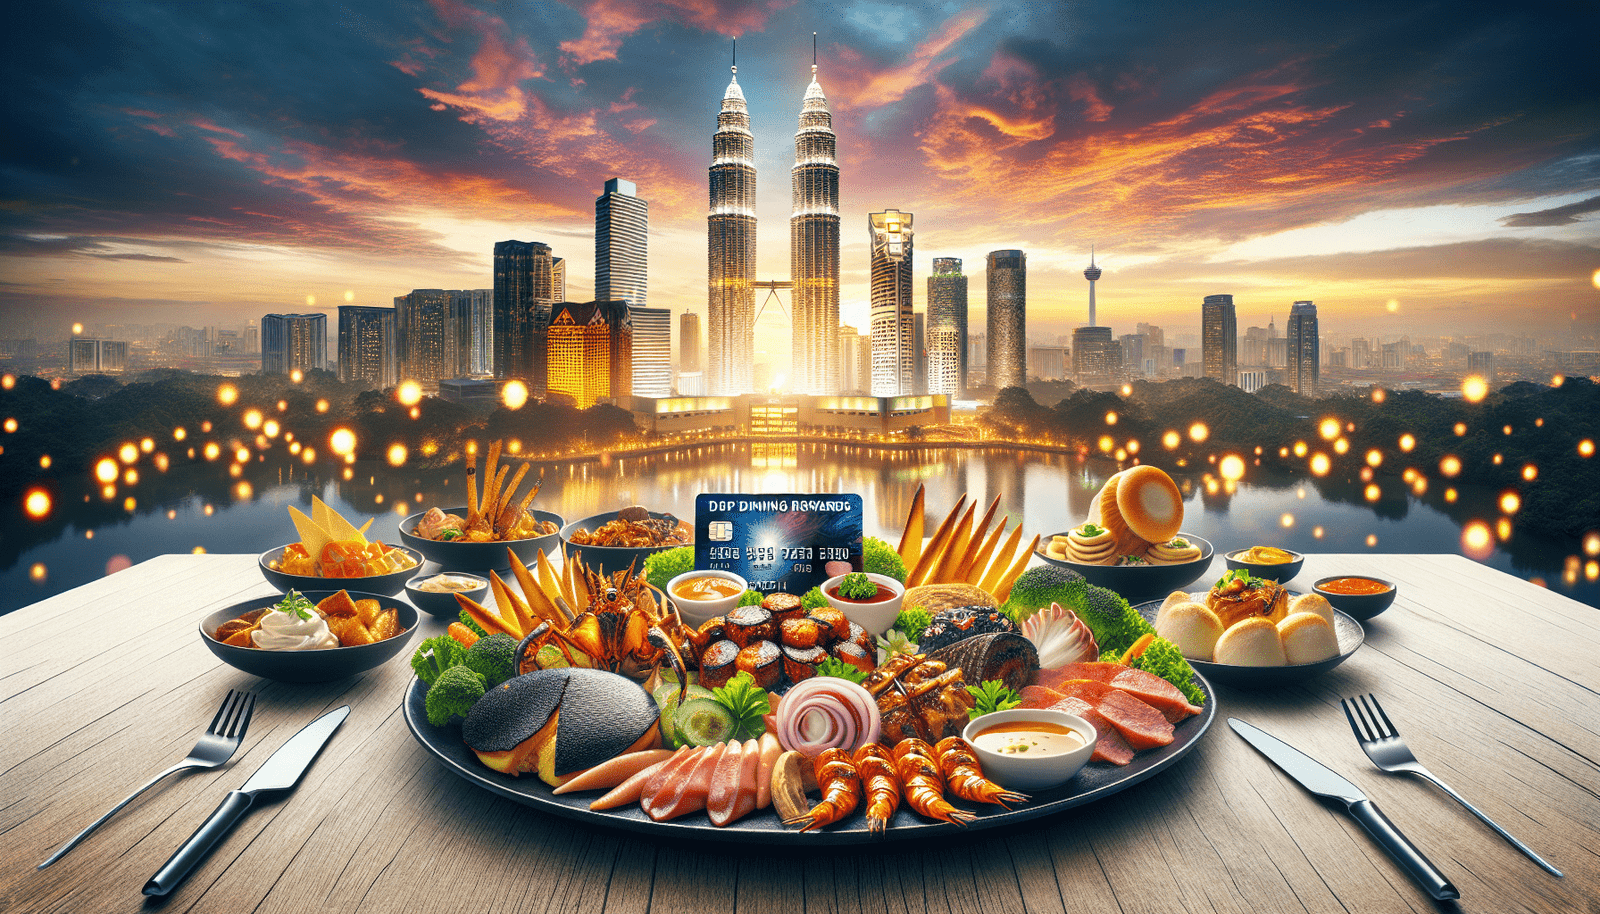 The Best Credit Card For Dining Rewards In Malaysia